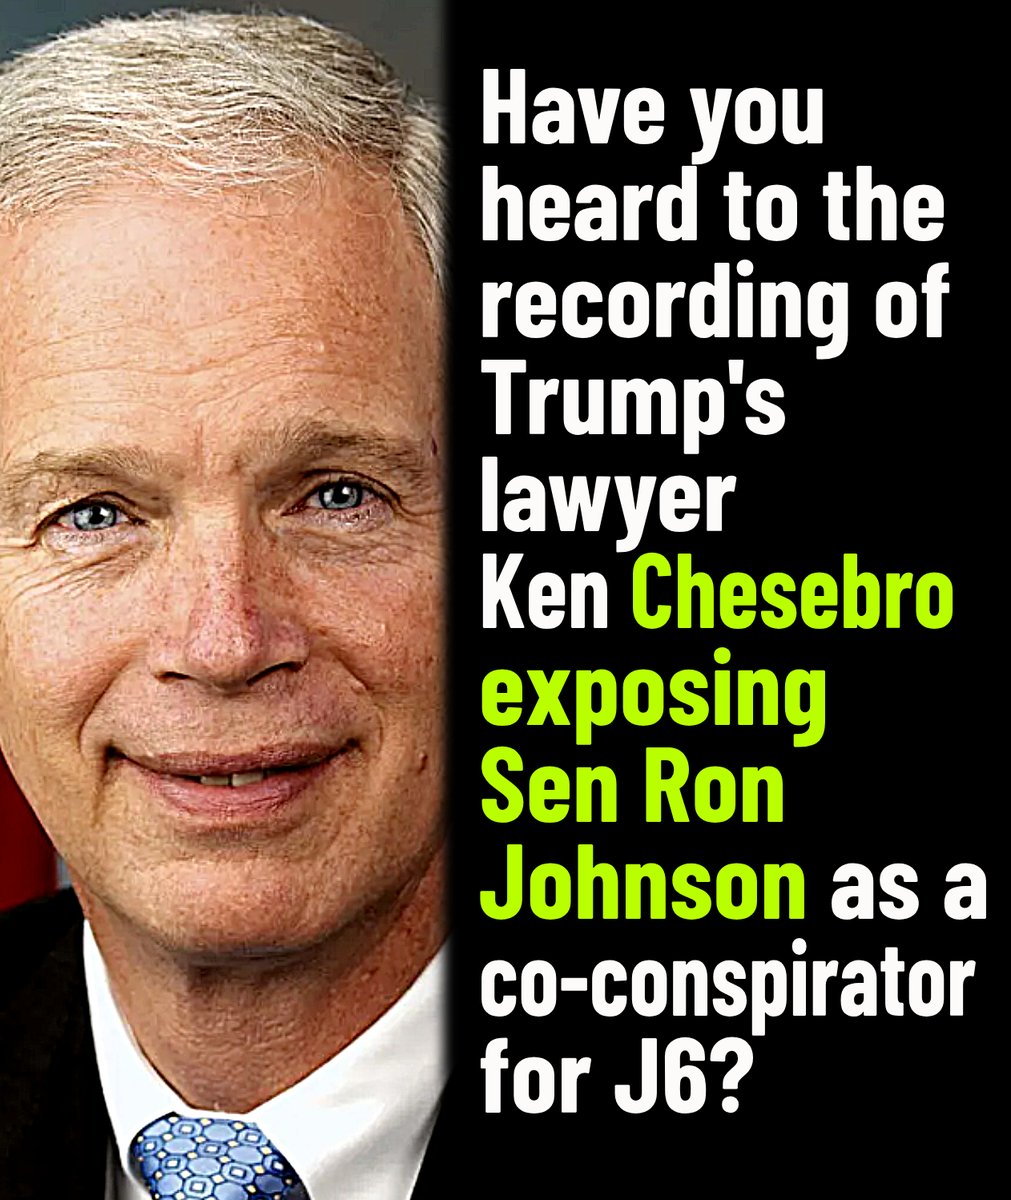 🇺🇸🇺🇸🇺🇸 Biden won Wisconsin fair and square Sen Ron Johnson tried to FRAUDulently give Wisconsin to Trump with FAKE electors Thats a FELONY. Ron Johnson will be indicted Ron Johnson will FLIP on Trump — @tooronlists